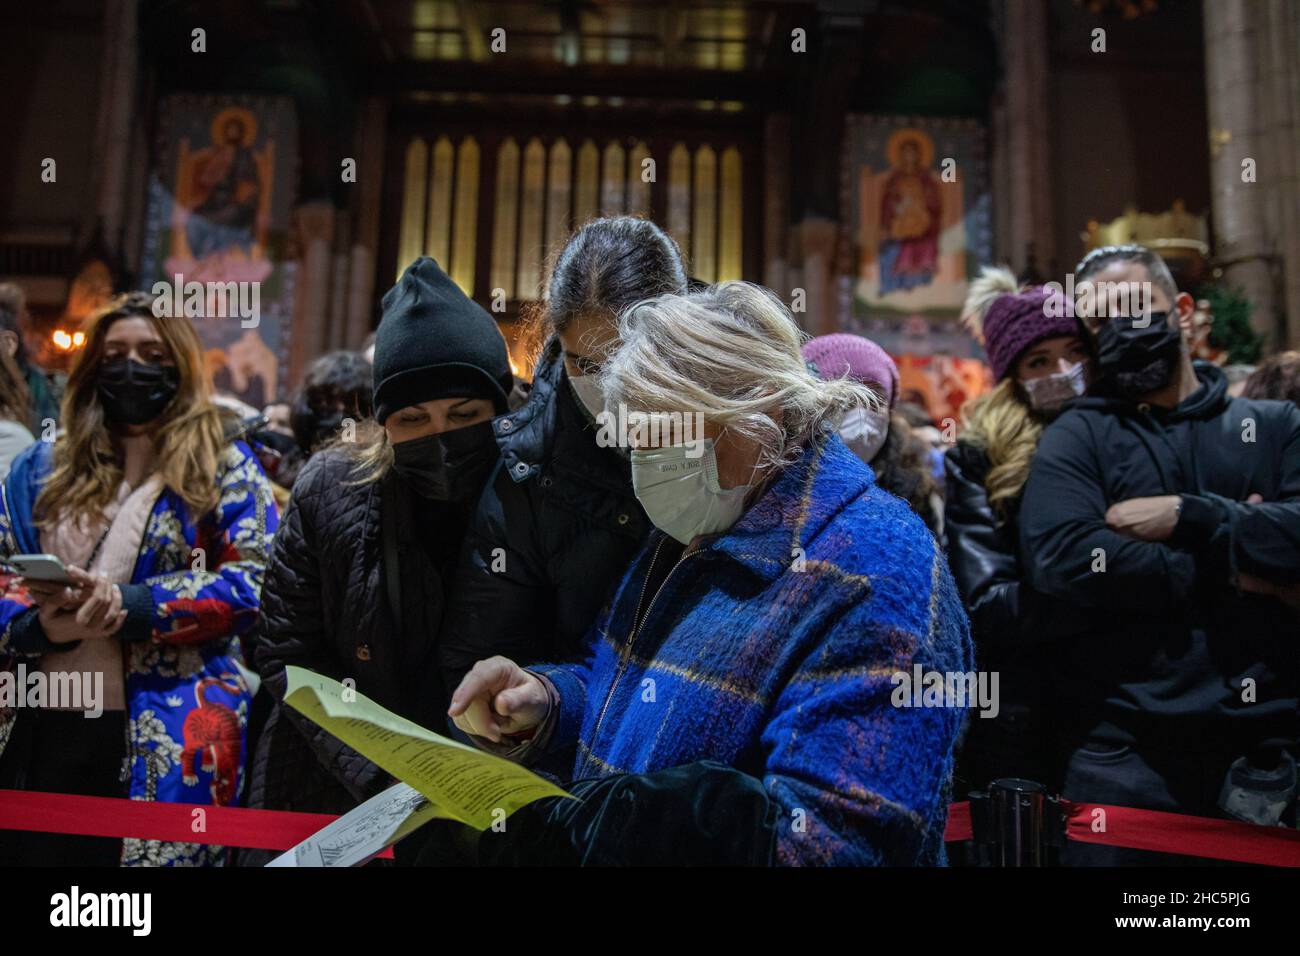 Celebration of the Christmas liturgy at the St. Anthony of Padua Church during the pandemic days in Istanbul, Turkey, December 24, 2021. Stock Photo